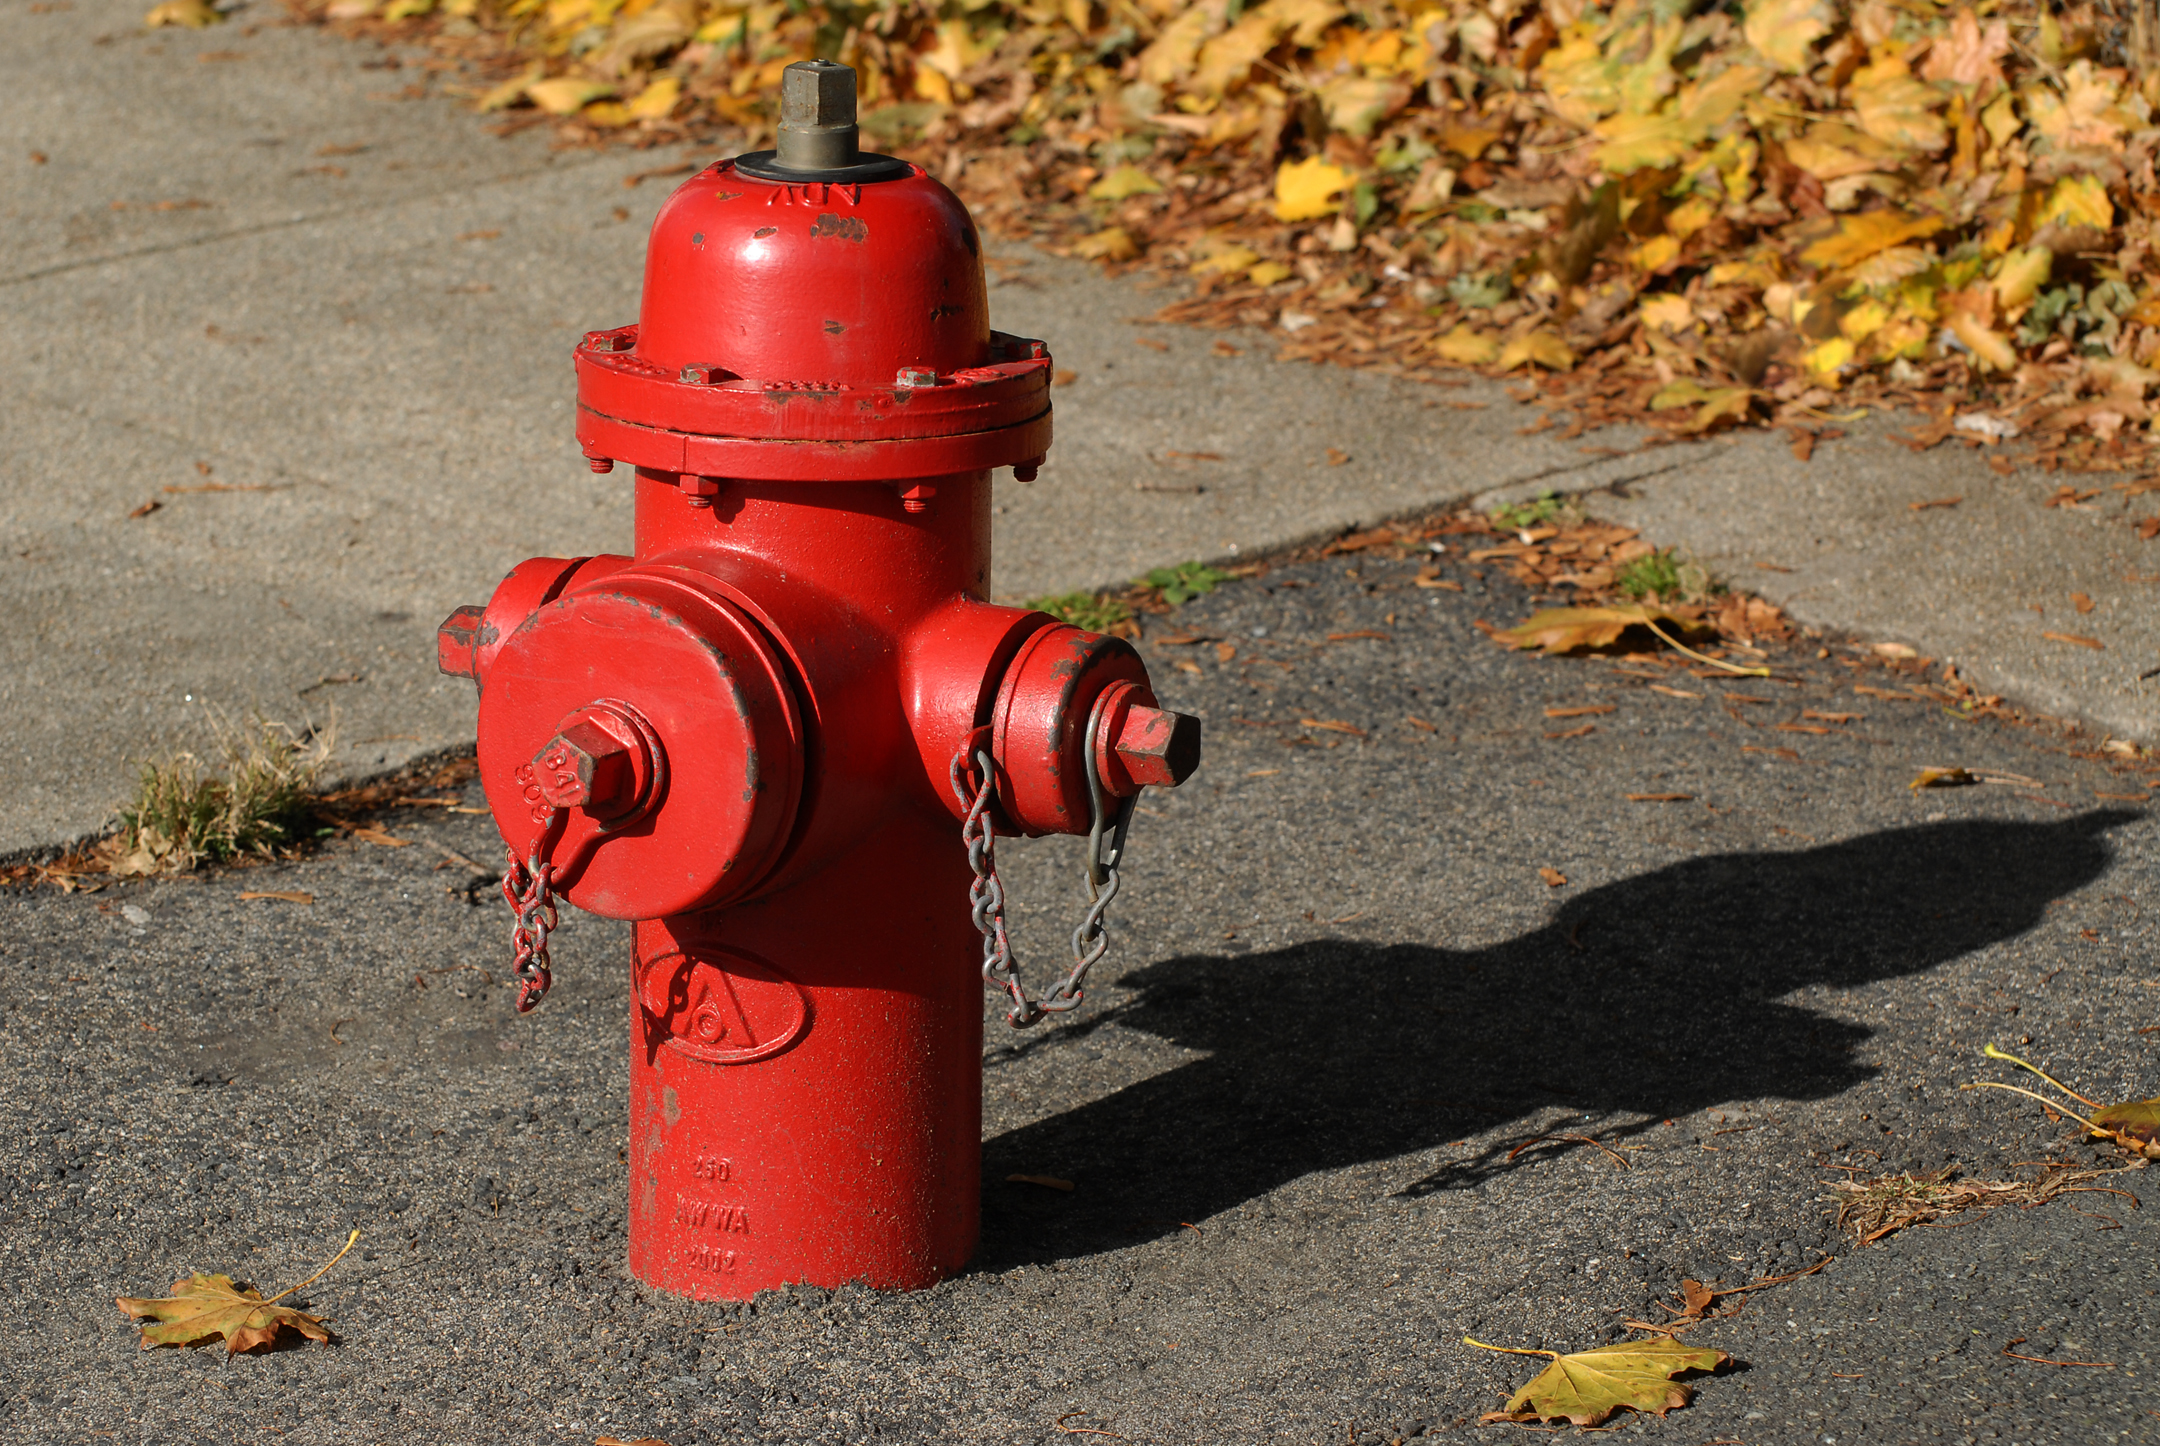 there is a red fire hydrant on the sidewalk